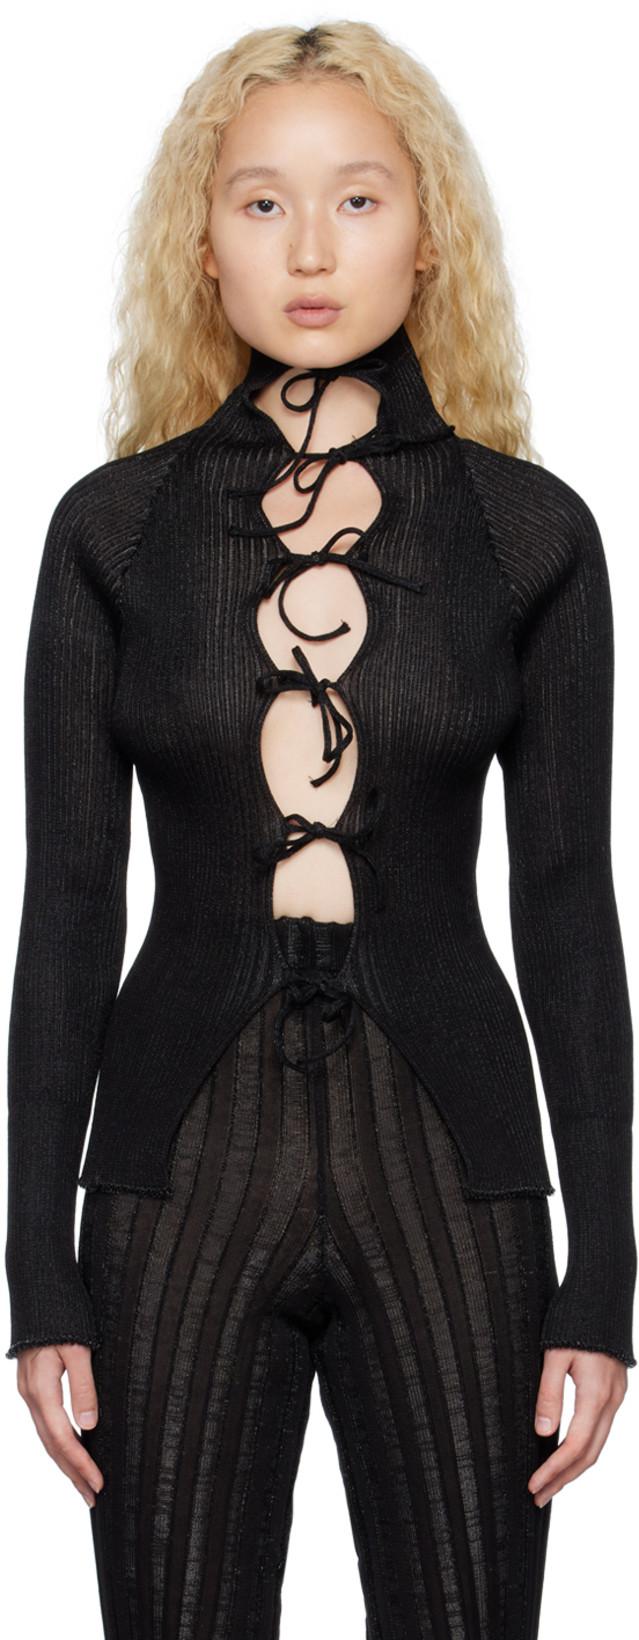 Black Emma Cardigan by A. ROEGE HOVE